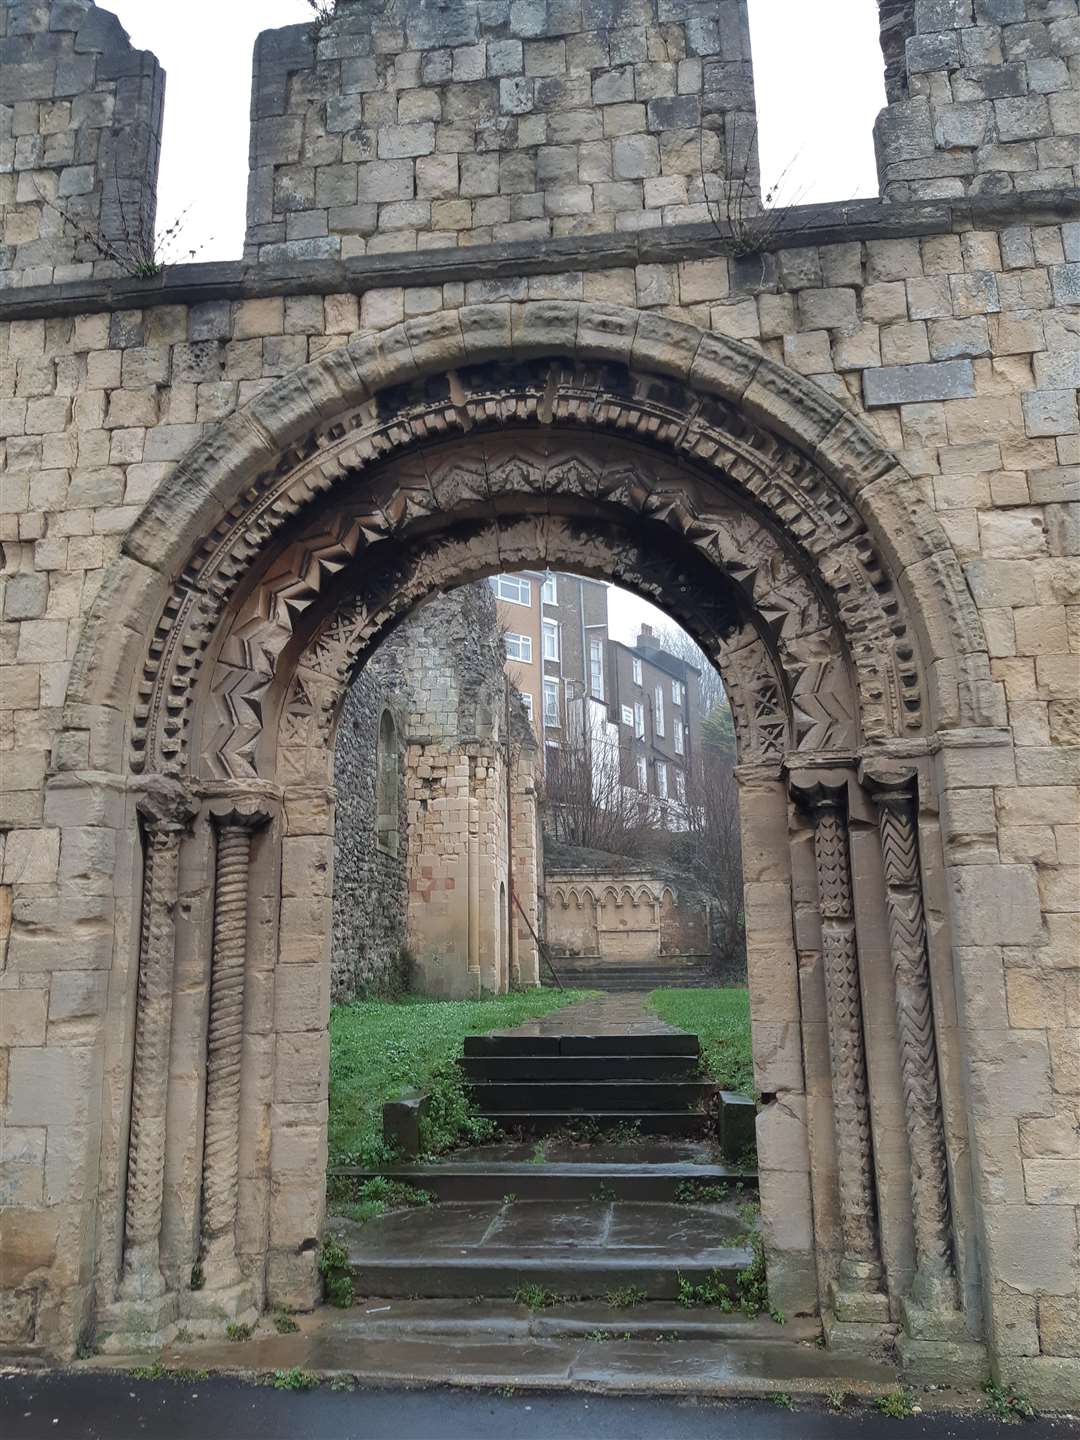 A stroll around St James' Church shows parts of the ruin's impressive architecture which survived Hitler's bombs